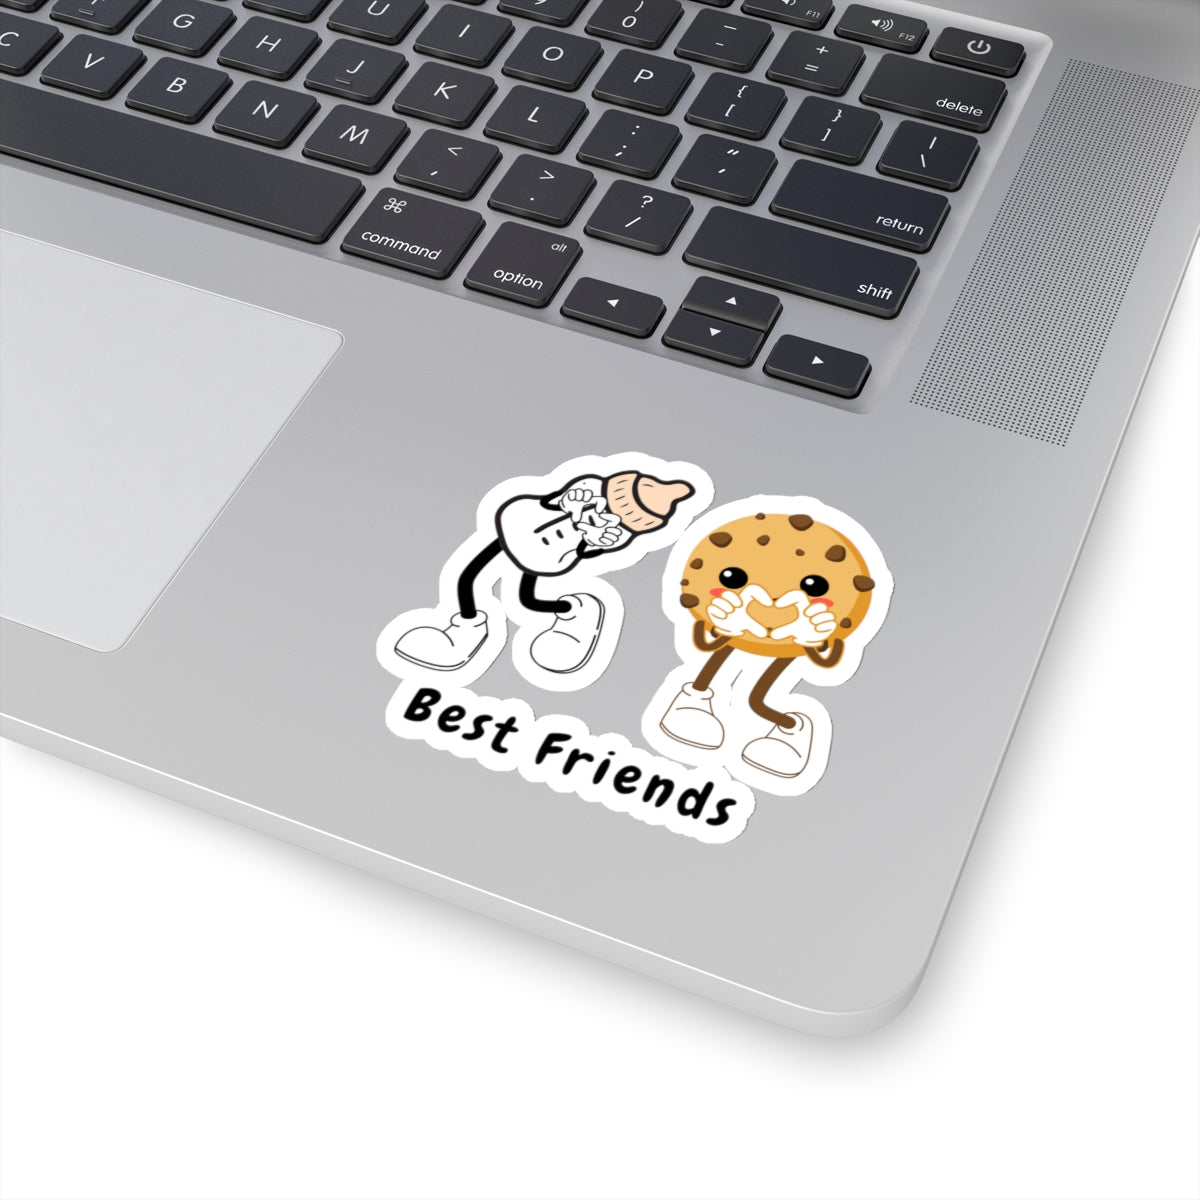 Best Friends Inspirational Quote Kiss-Cut Stickers-Paper products-mysticalcherry